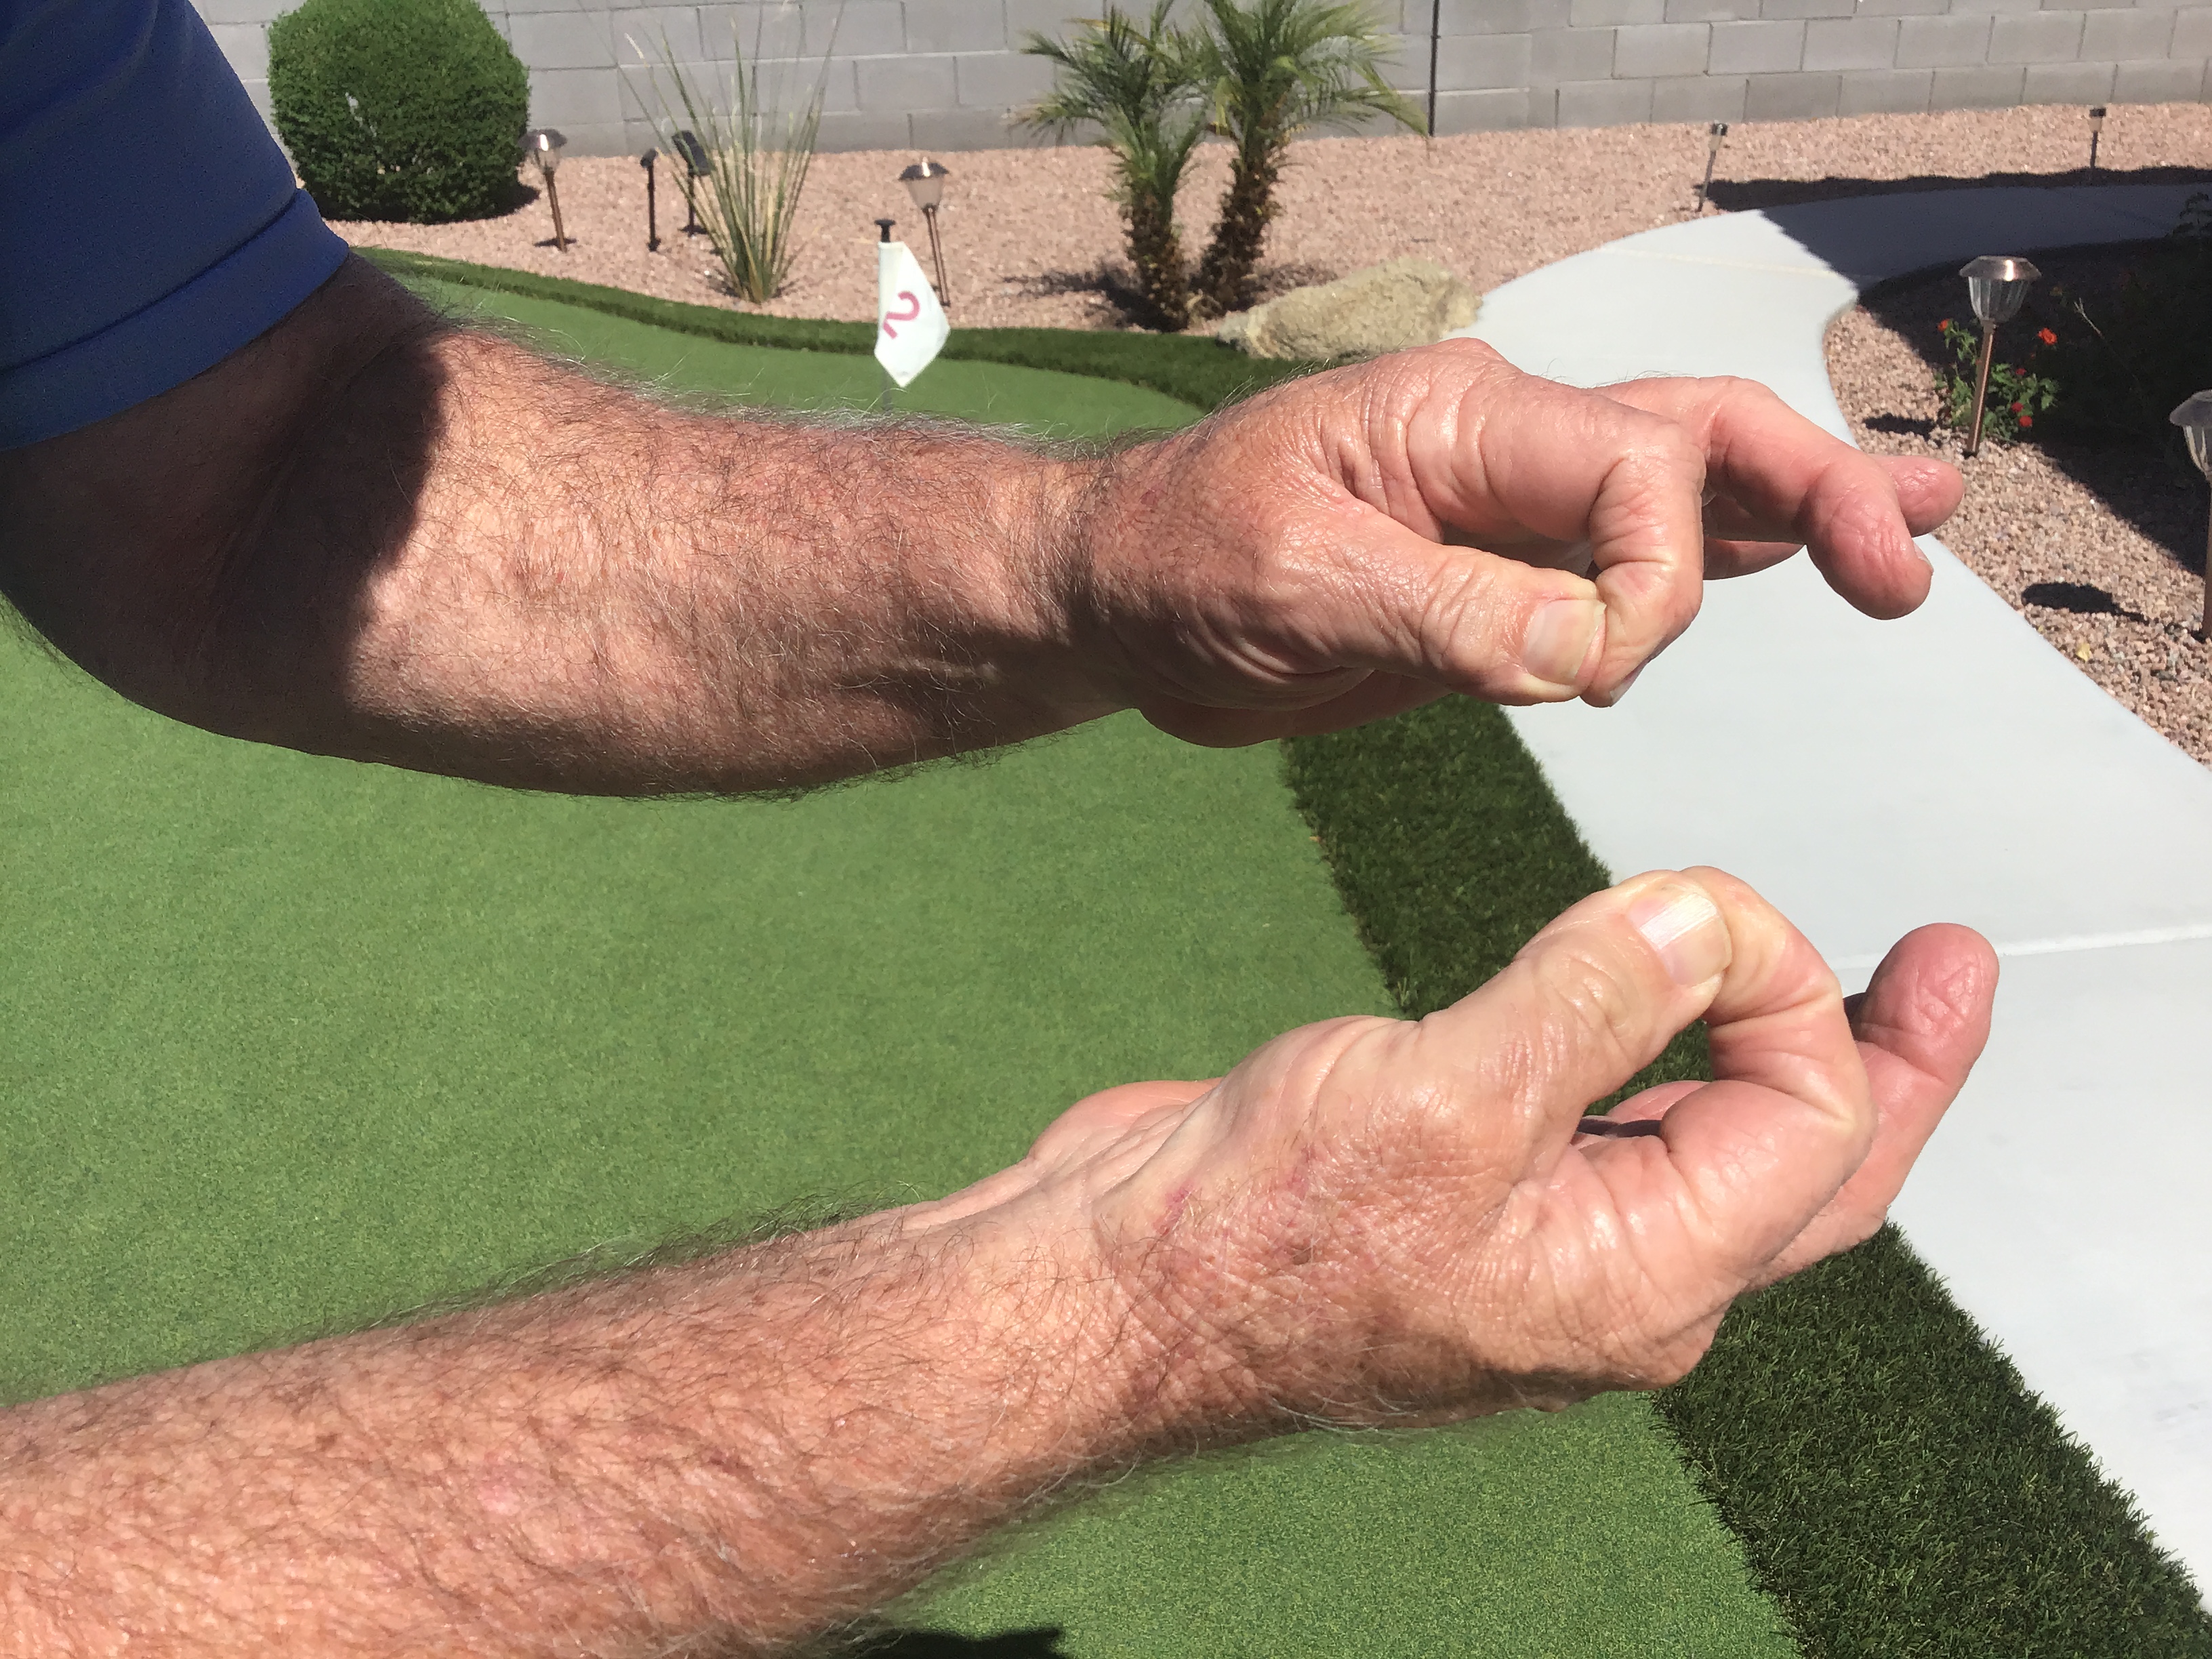 Eliminate the squeezing of thumb and fore finger